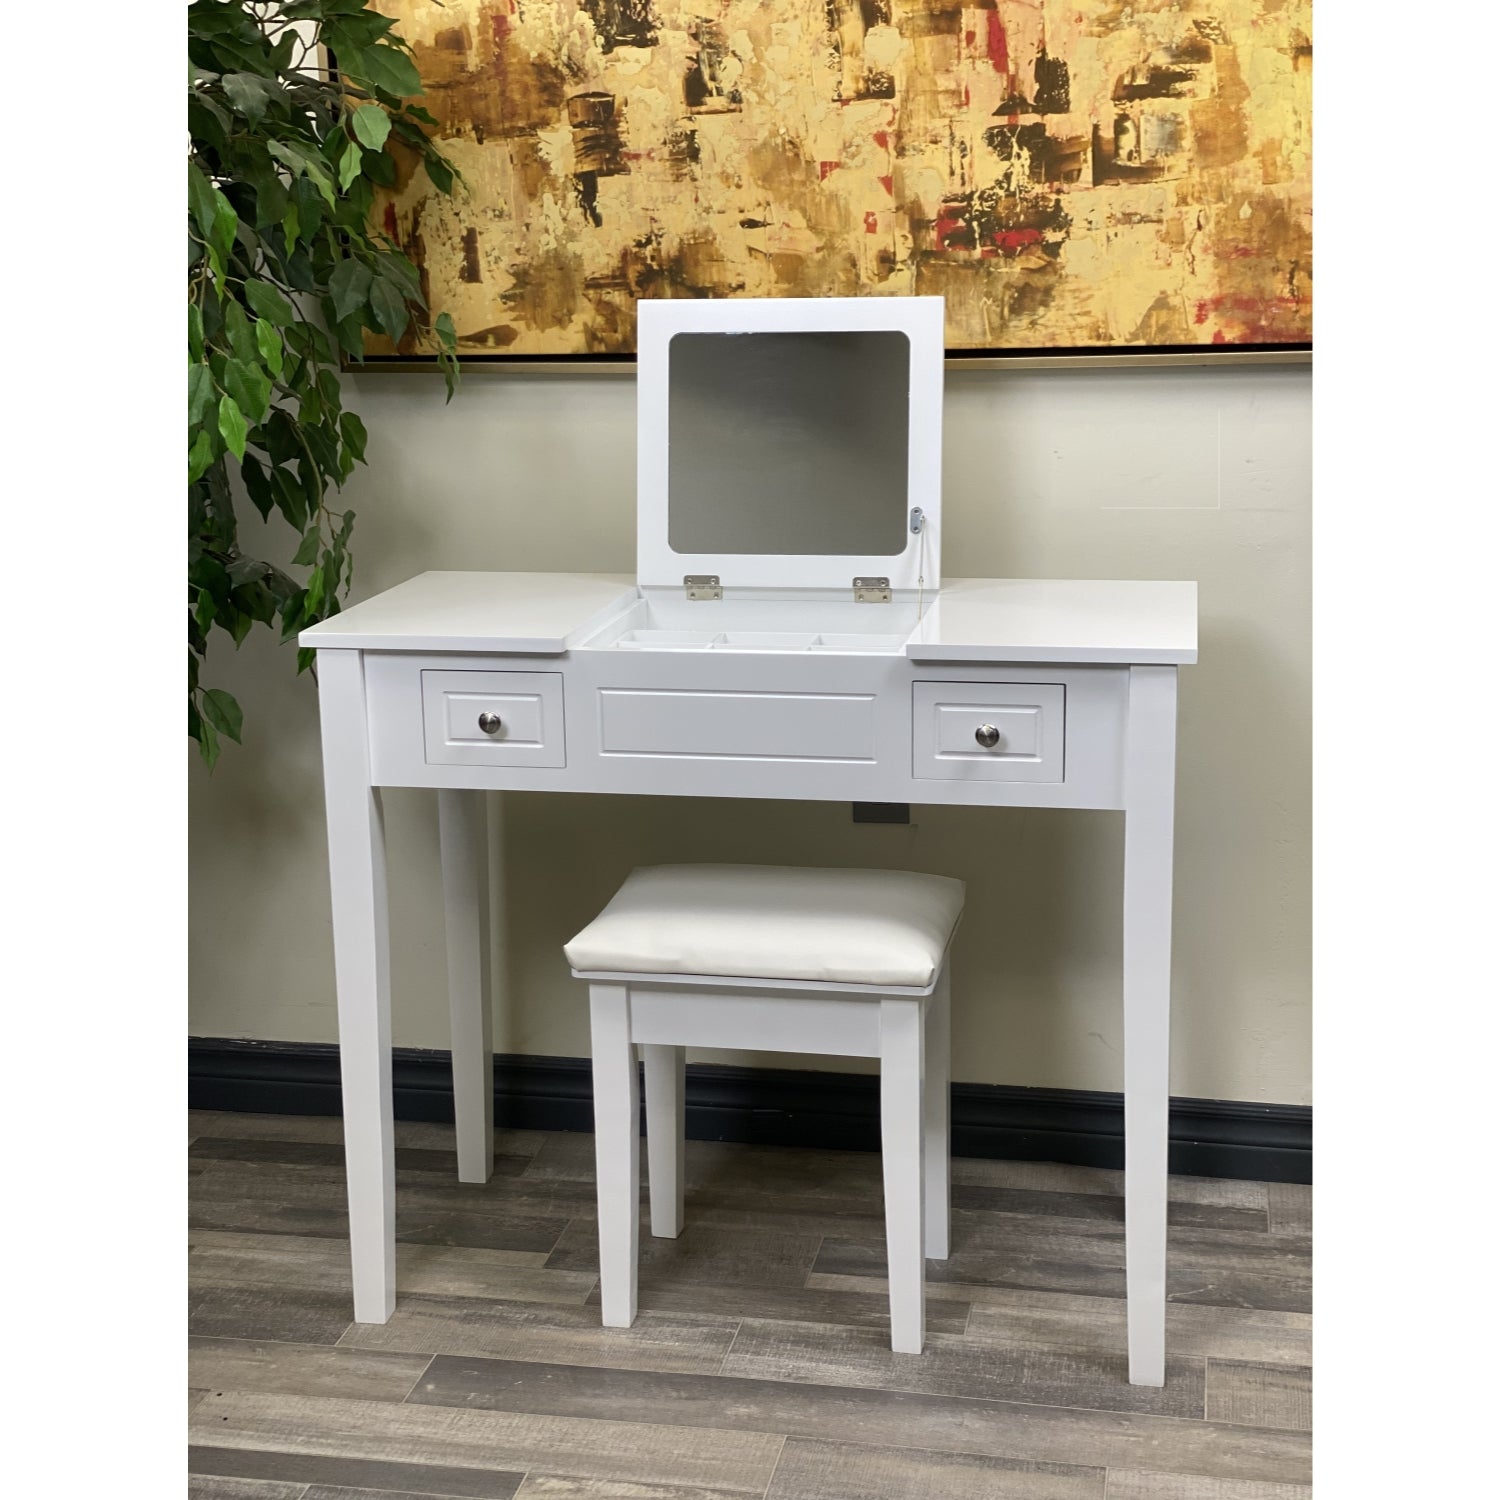 ViscoLogic WDTS Leatherette Square Wooden Makeup Vanity Dressing Table With Stool (White)